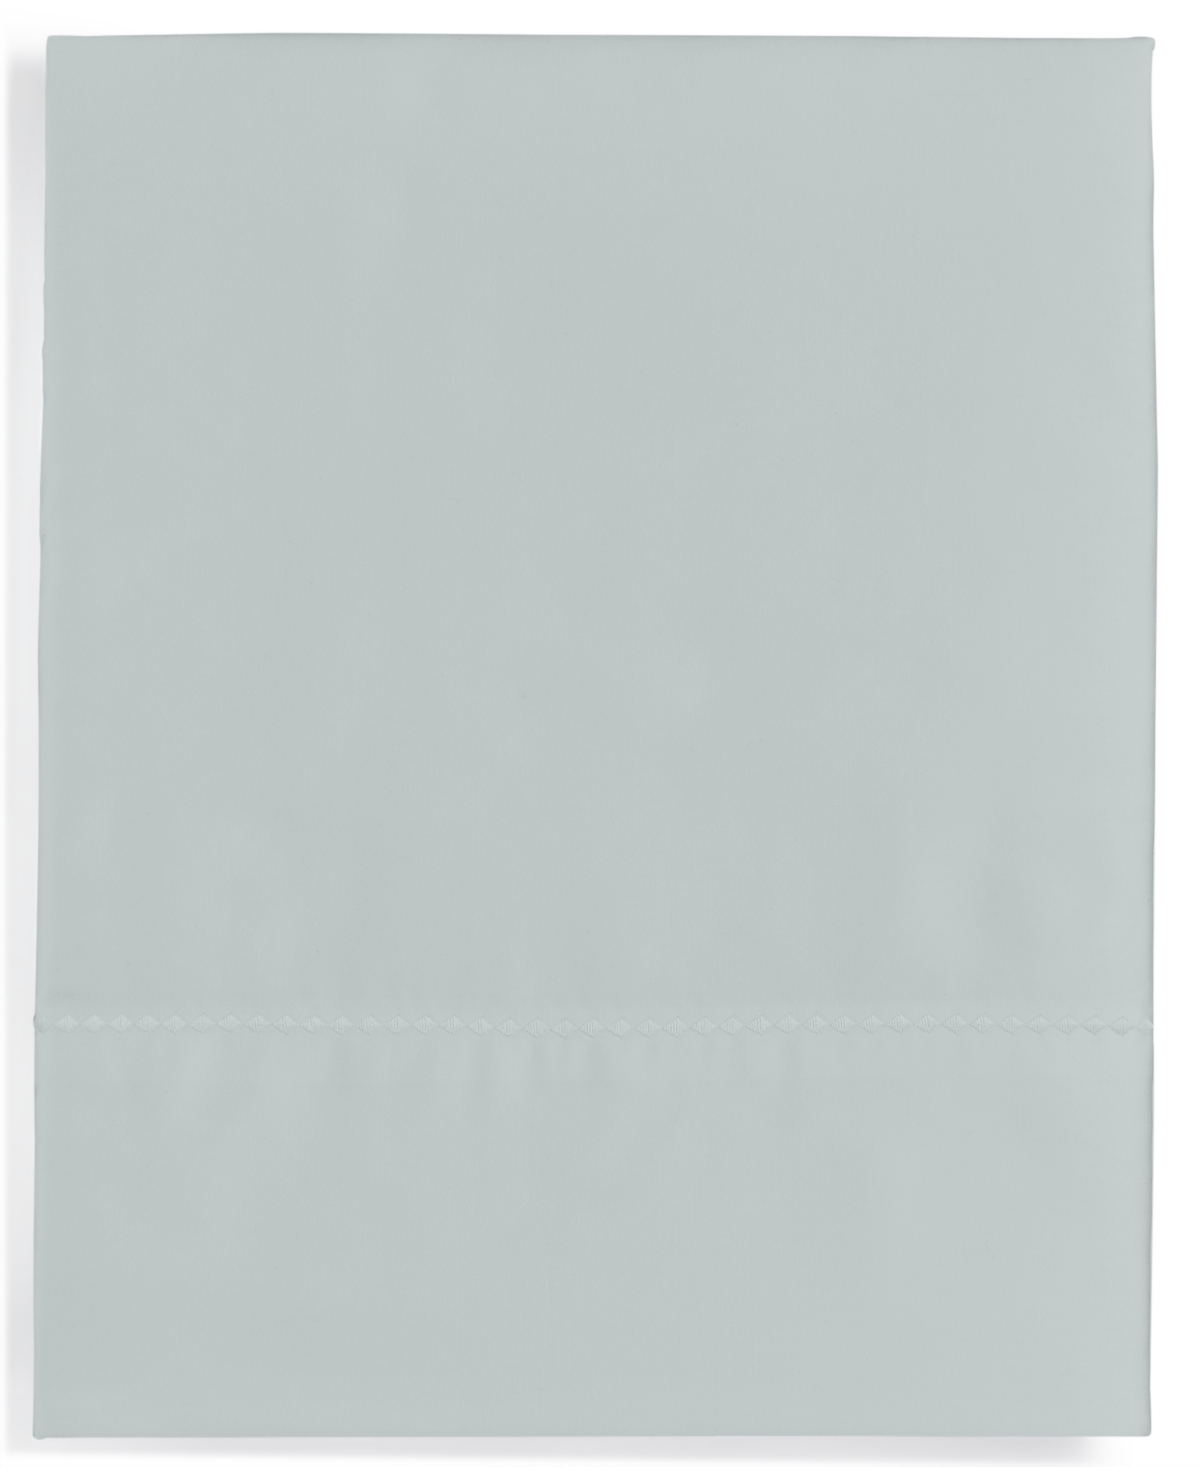 MARTHA STEWART COLLECTION CLOSEOUT! MARTHA STEWART COLLECTION OPEN STOCK SOLID 400 THREAD COUNT COTTON SATEEN FLAT SHEET, KING